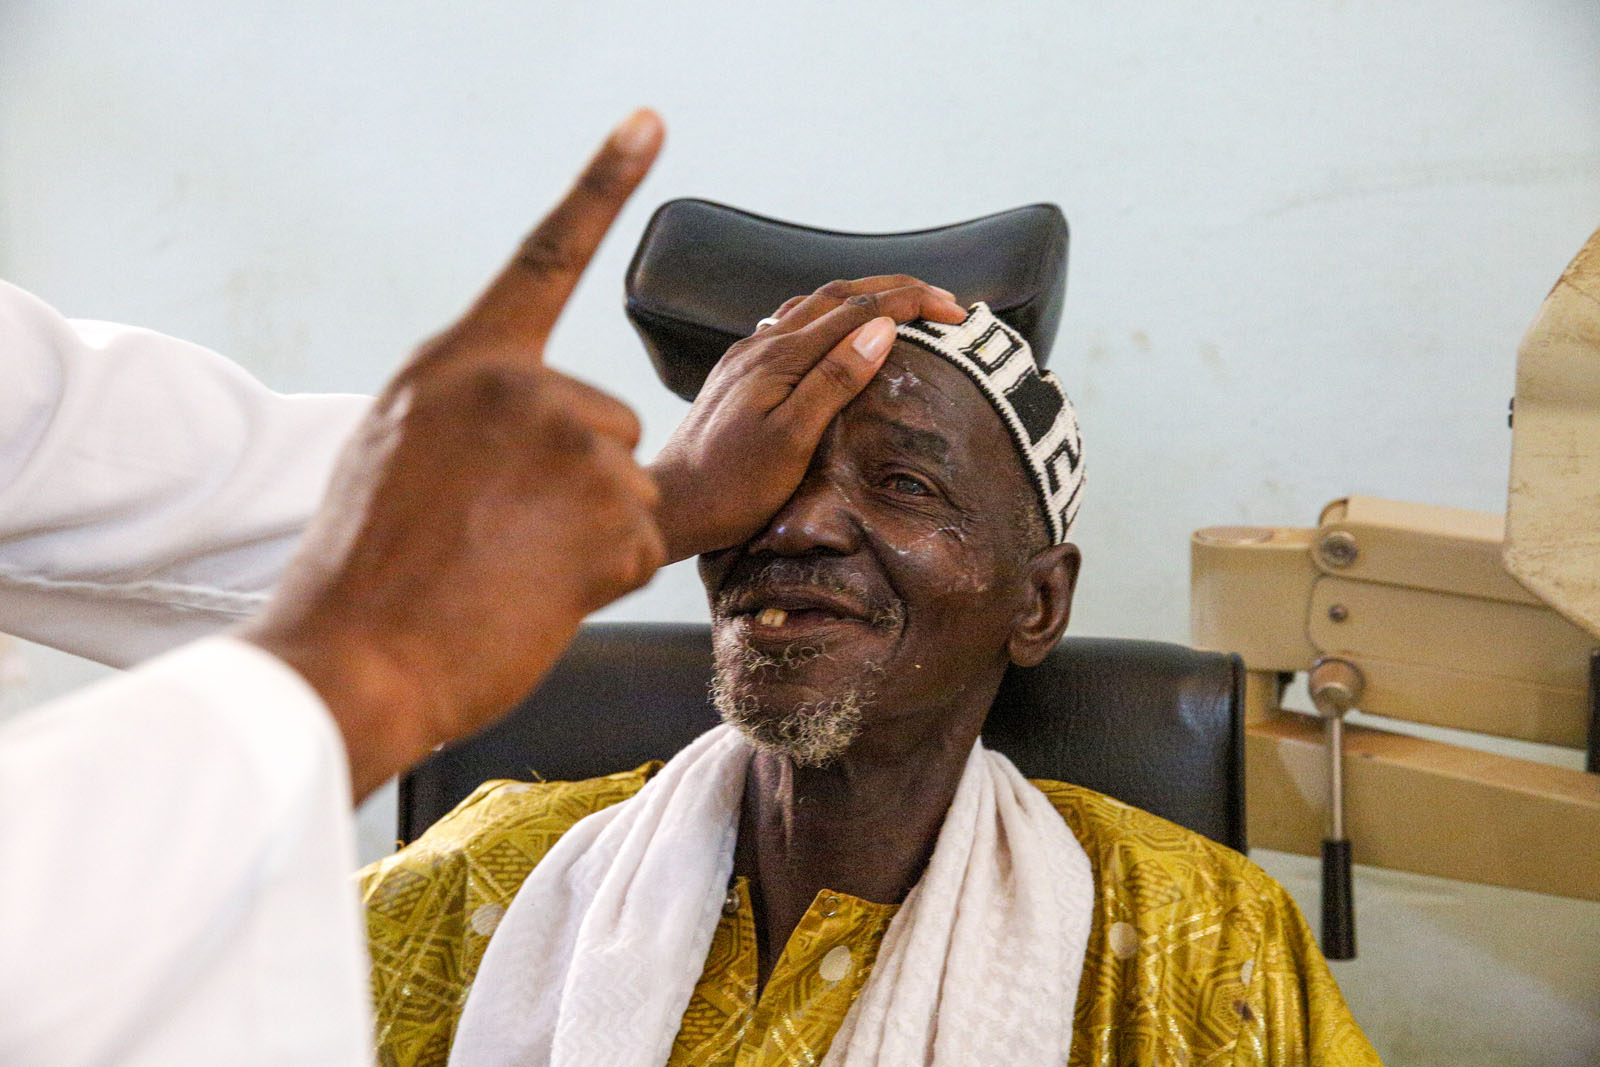 7,427 Cataract Surgeries in Five Countries